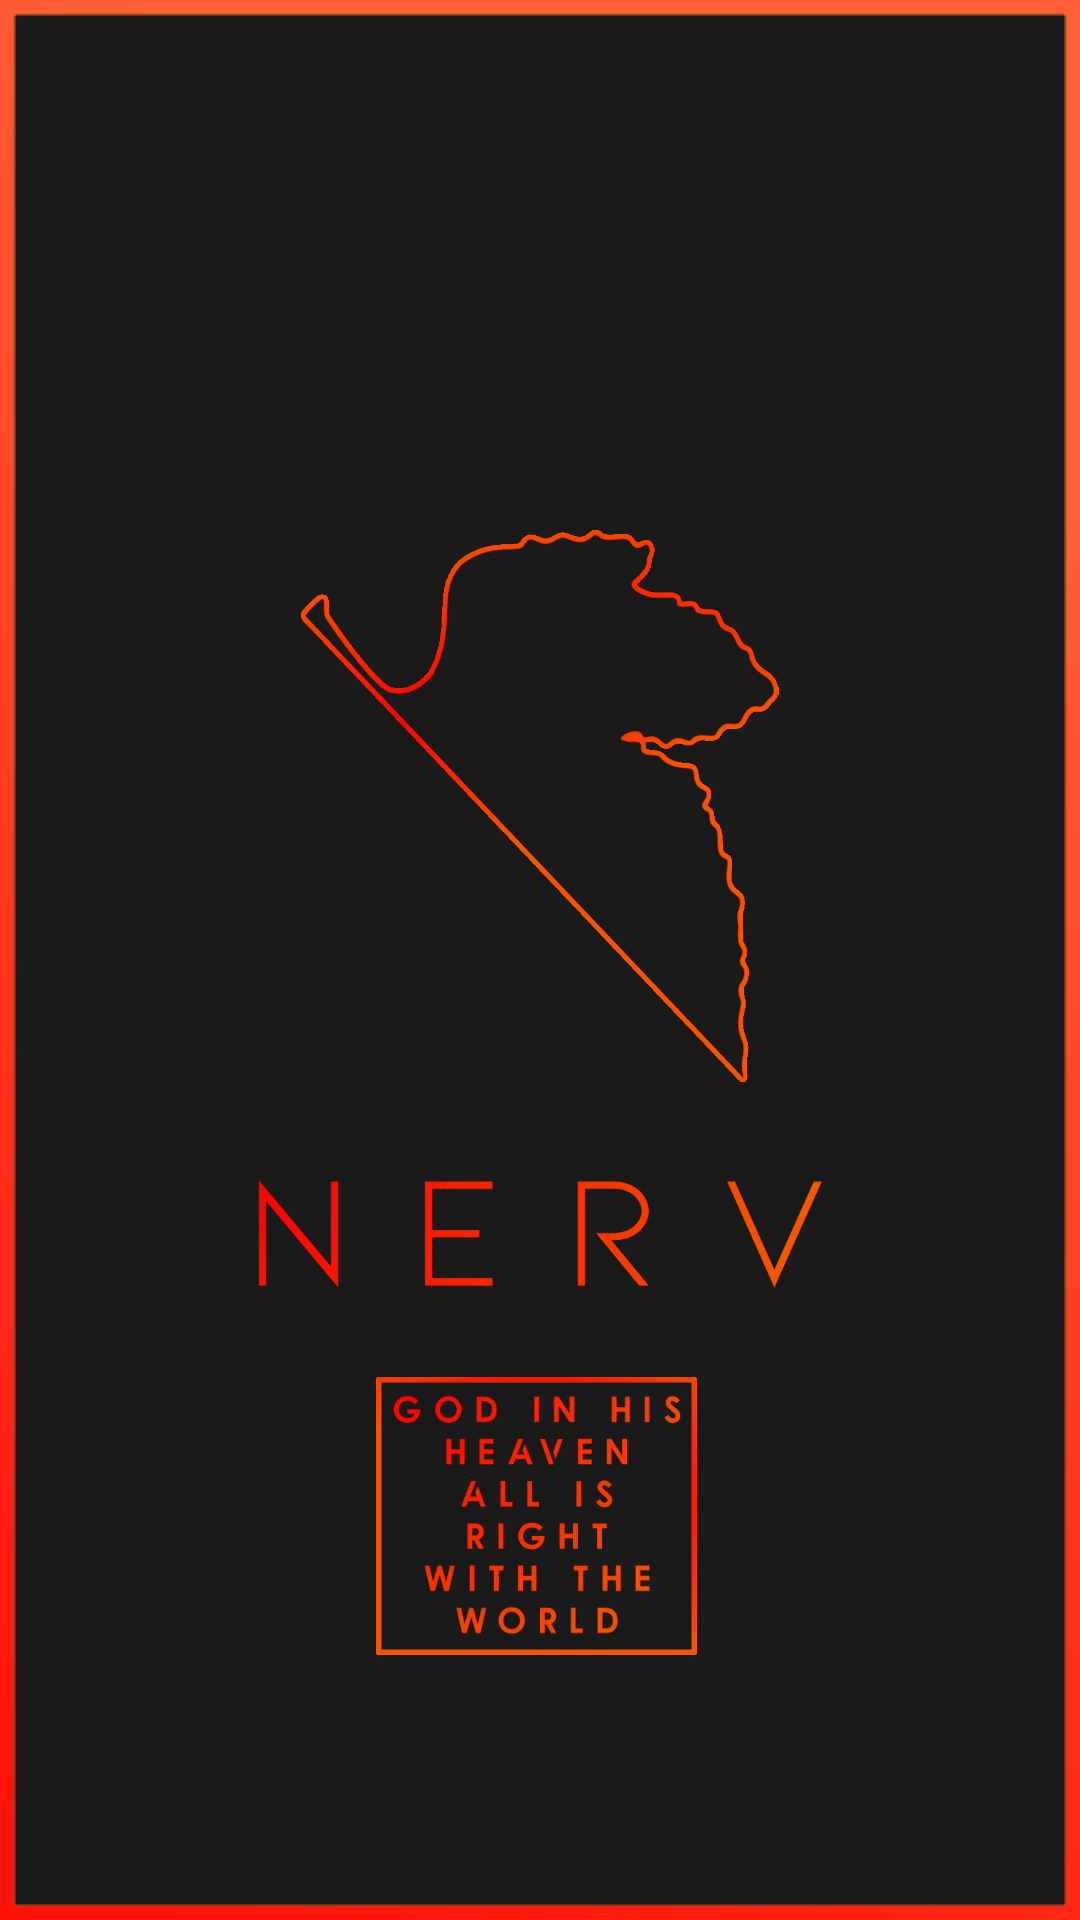 Minimalistic phone wallpaper NERV themed black and white versions